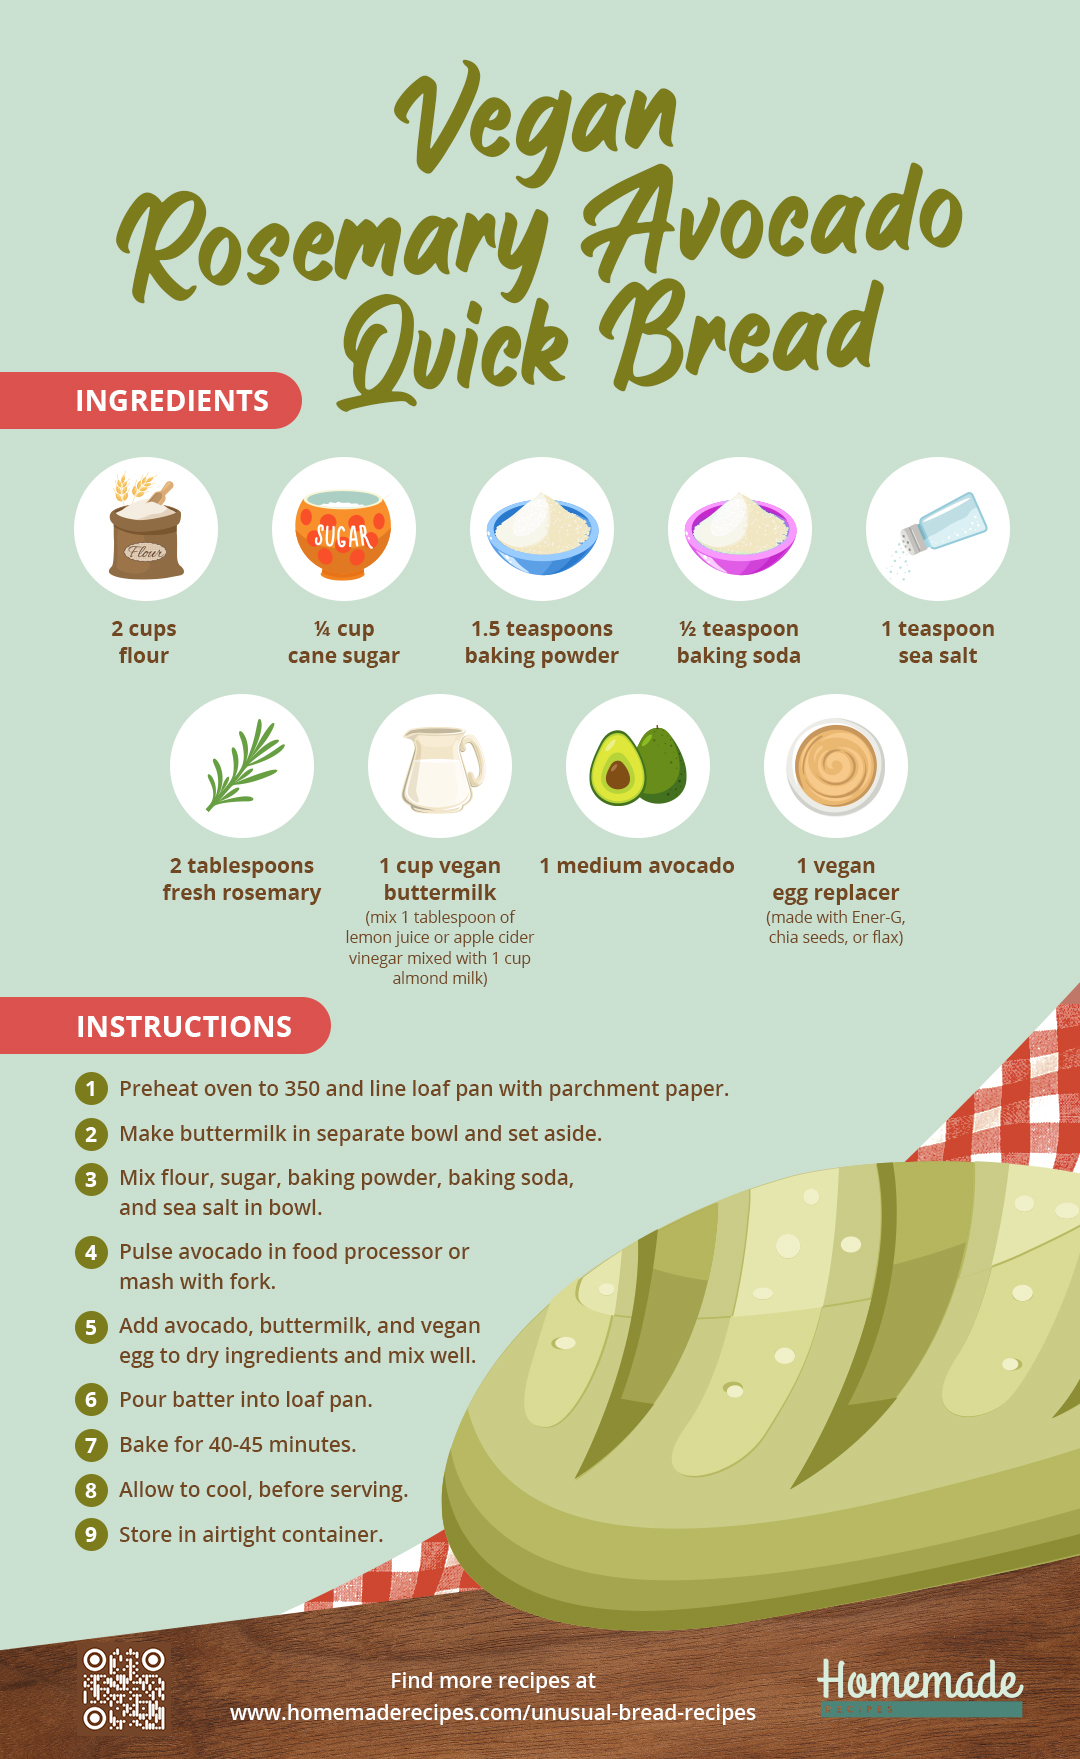 Vegan Rosemary Avocado Quick Bread | Unusual Bread Recipes You Have To Try [INFOGRAPHIC]